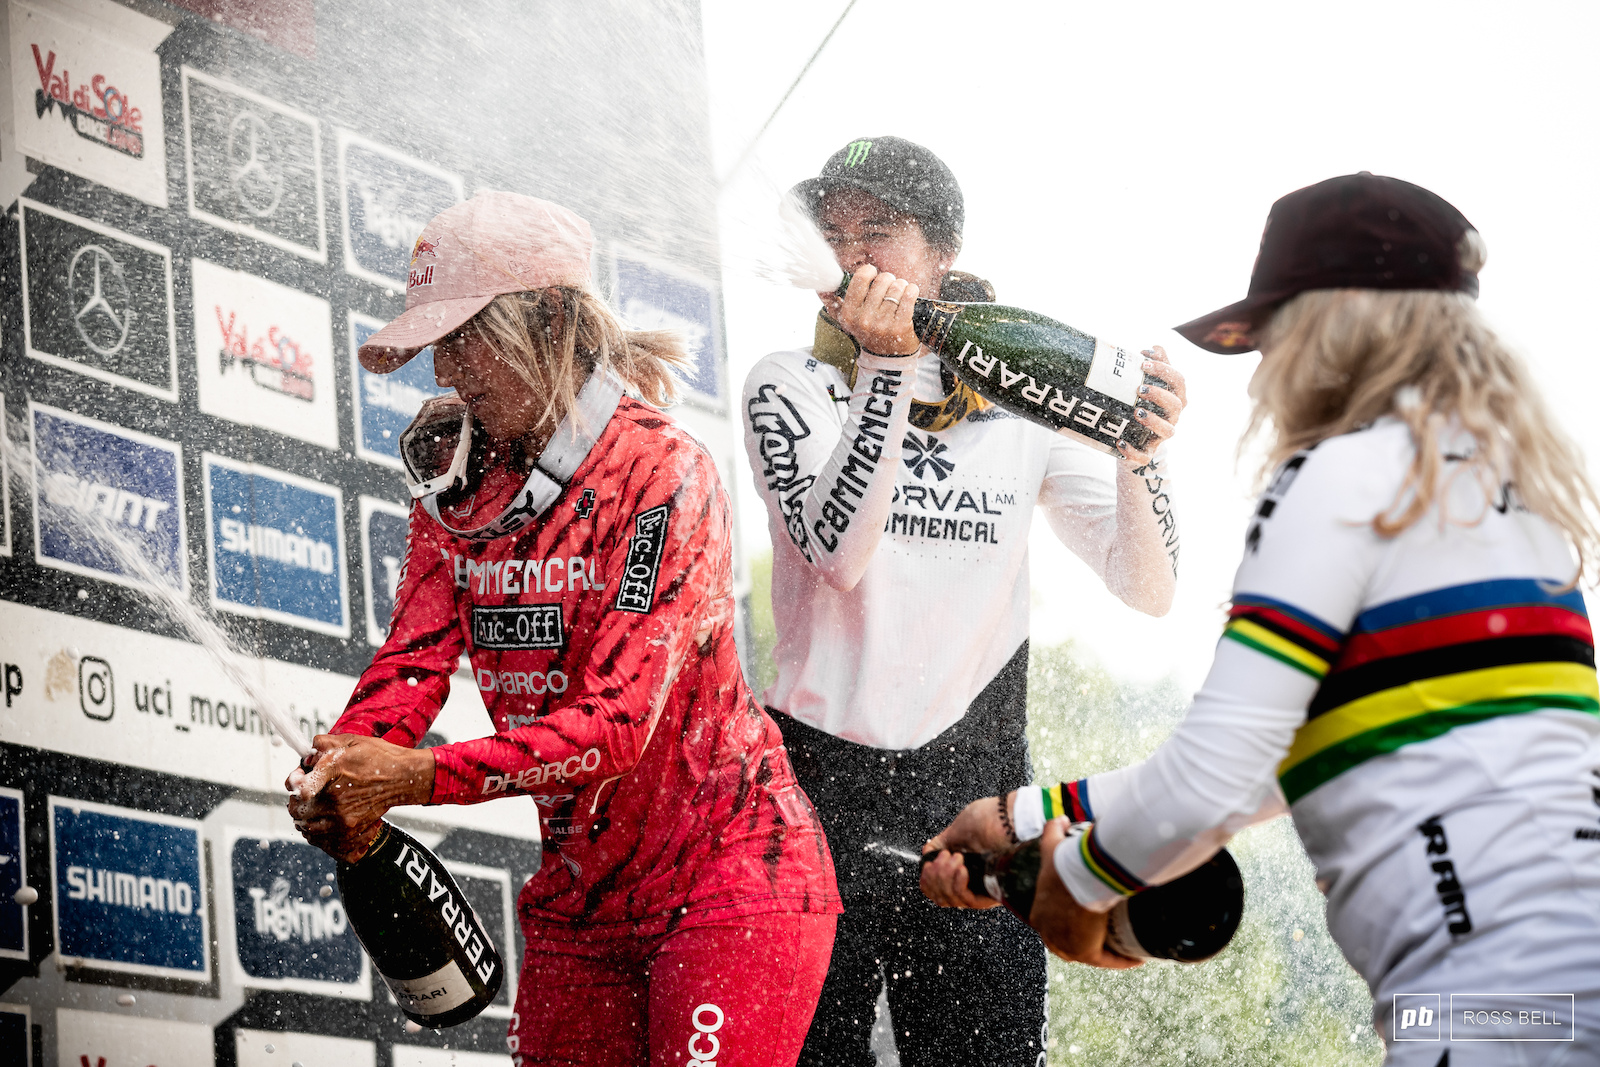 The final champagne showers of the season.